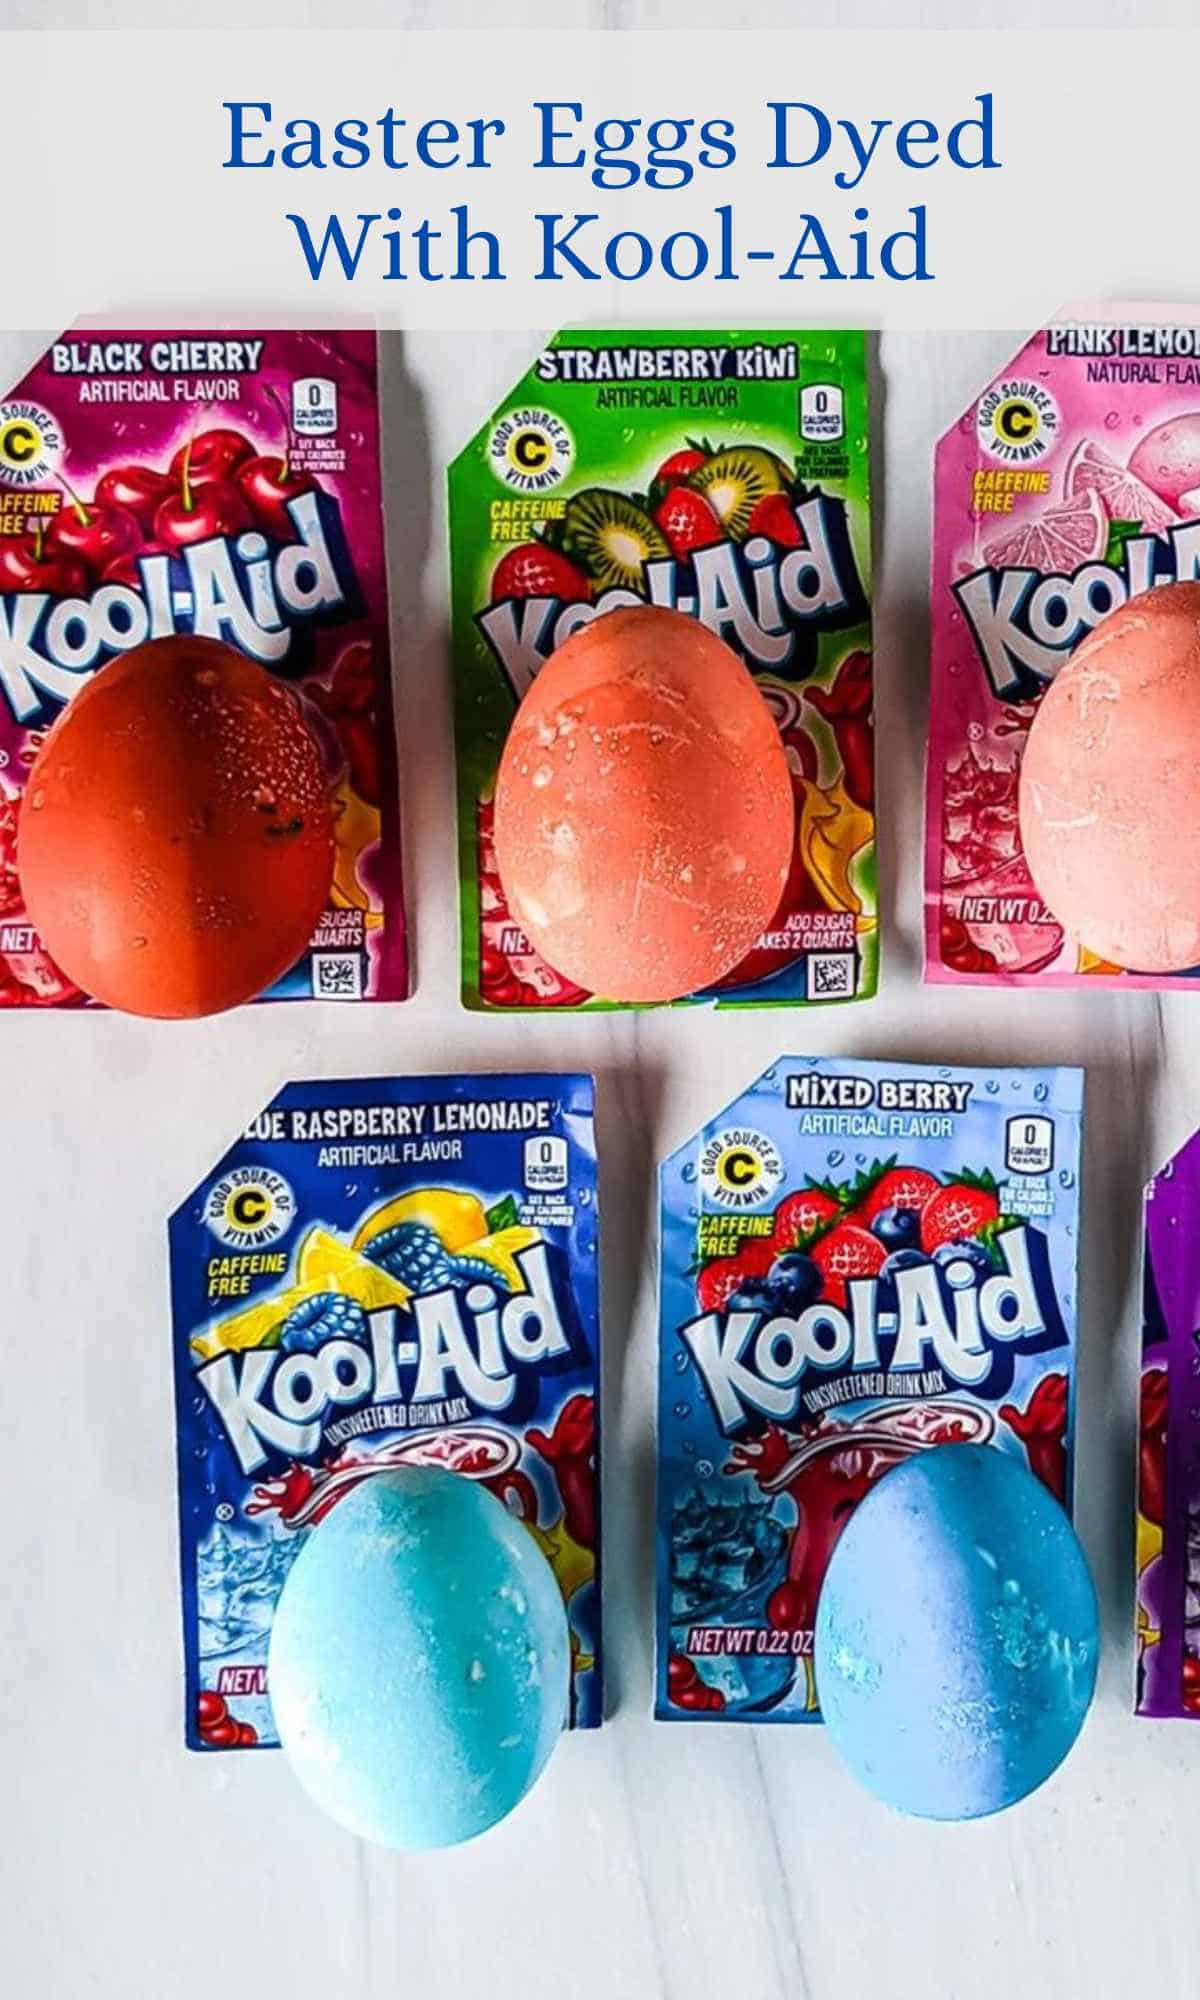 Easter eggs dyed with Kool-Aid